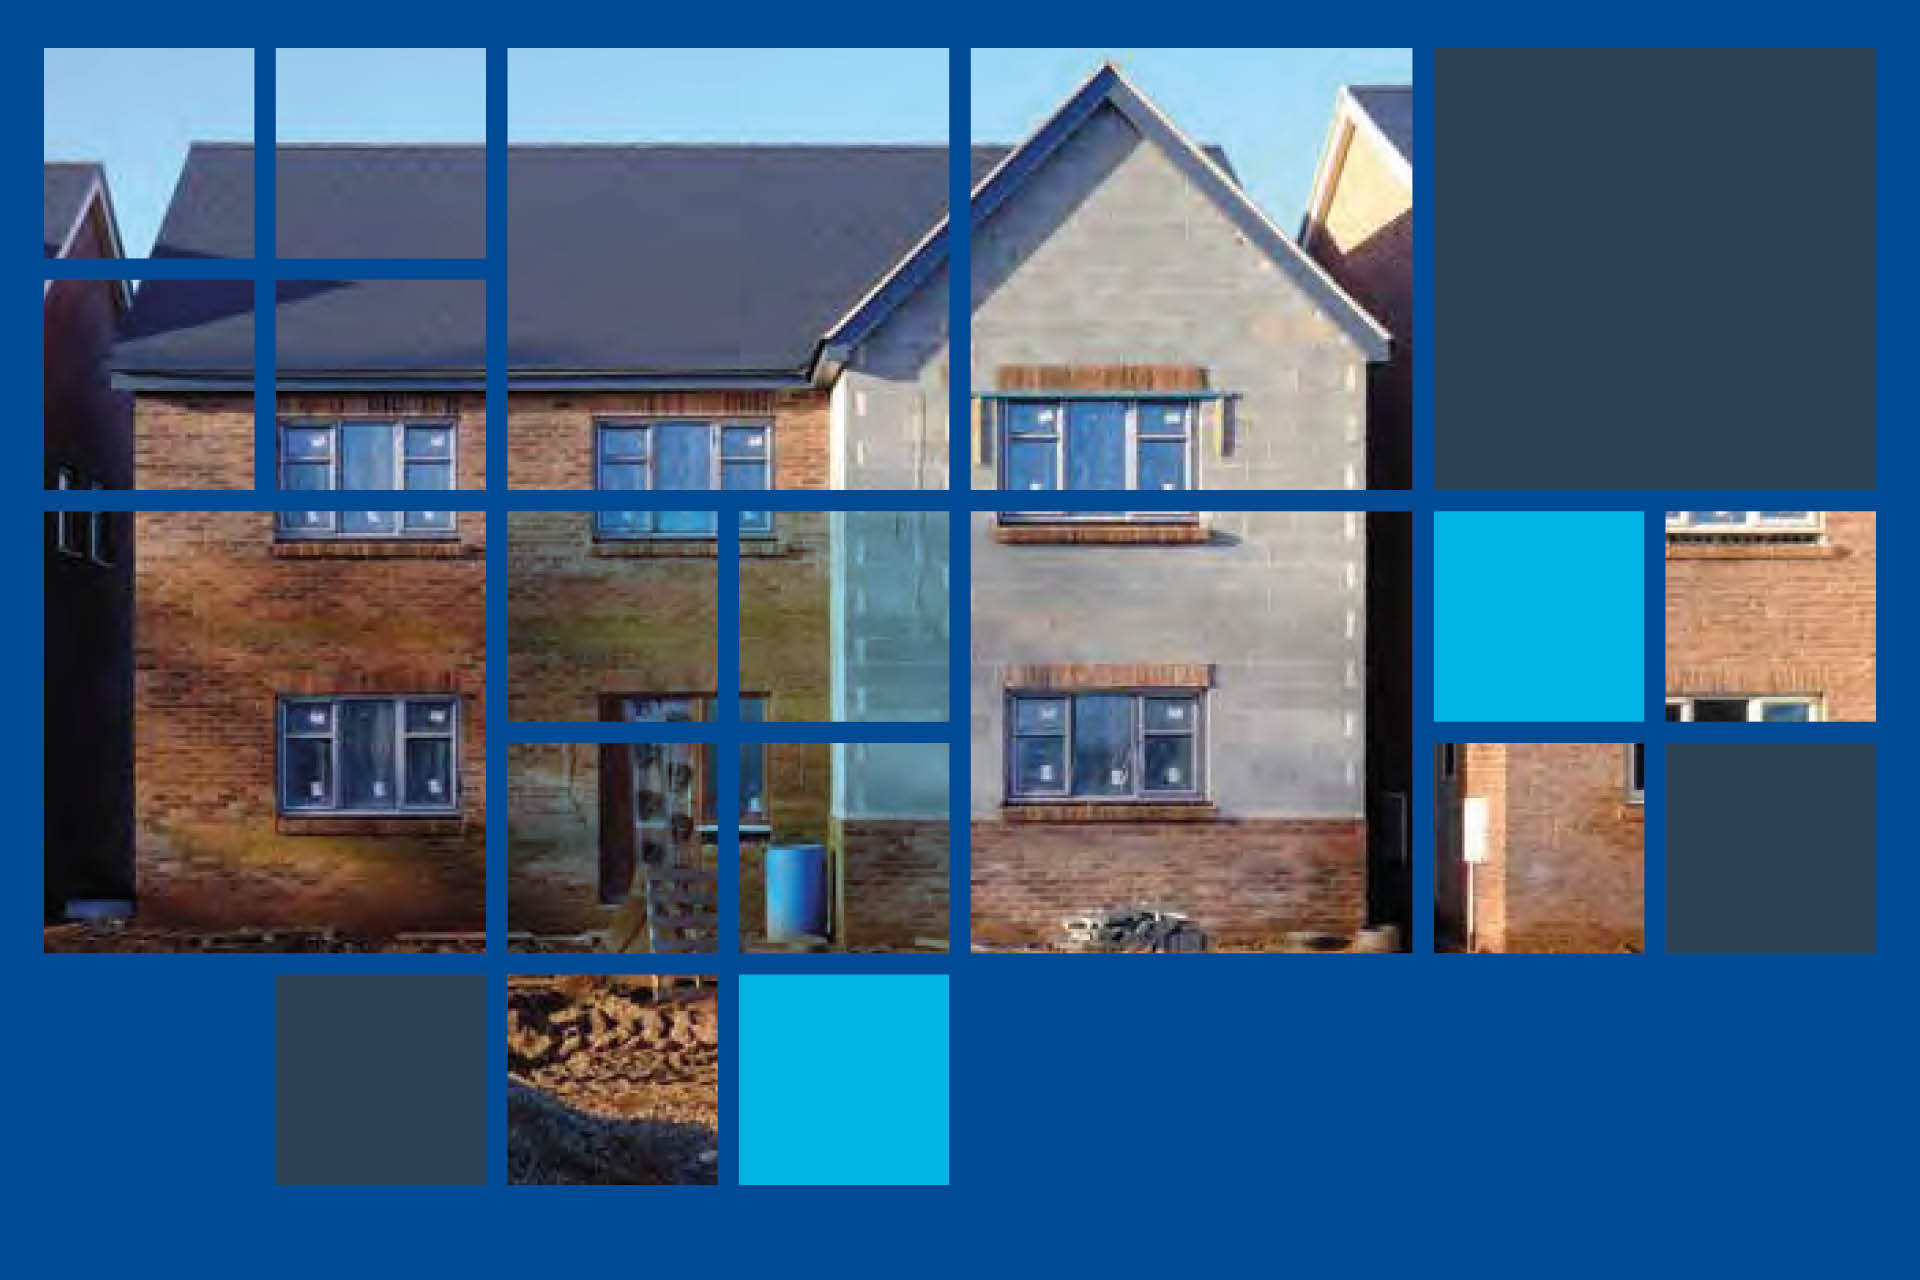 a photo of a house under construction with a blue square overlay